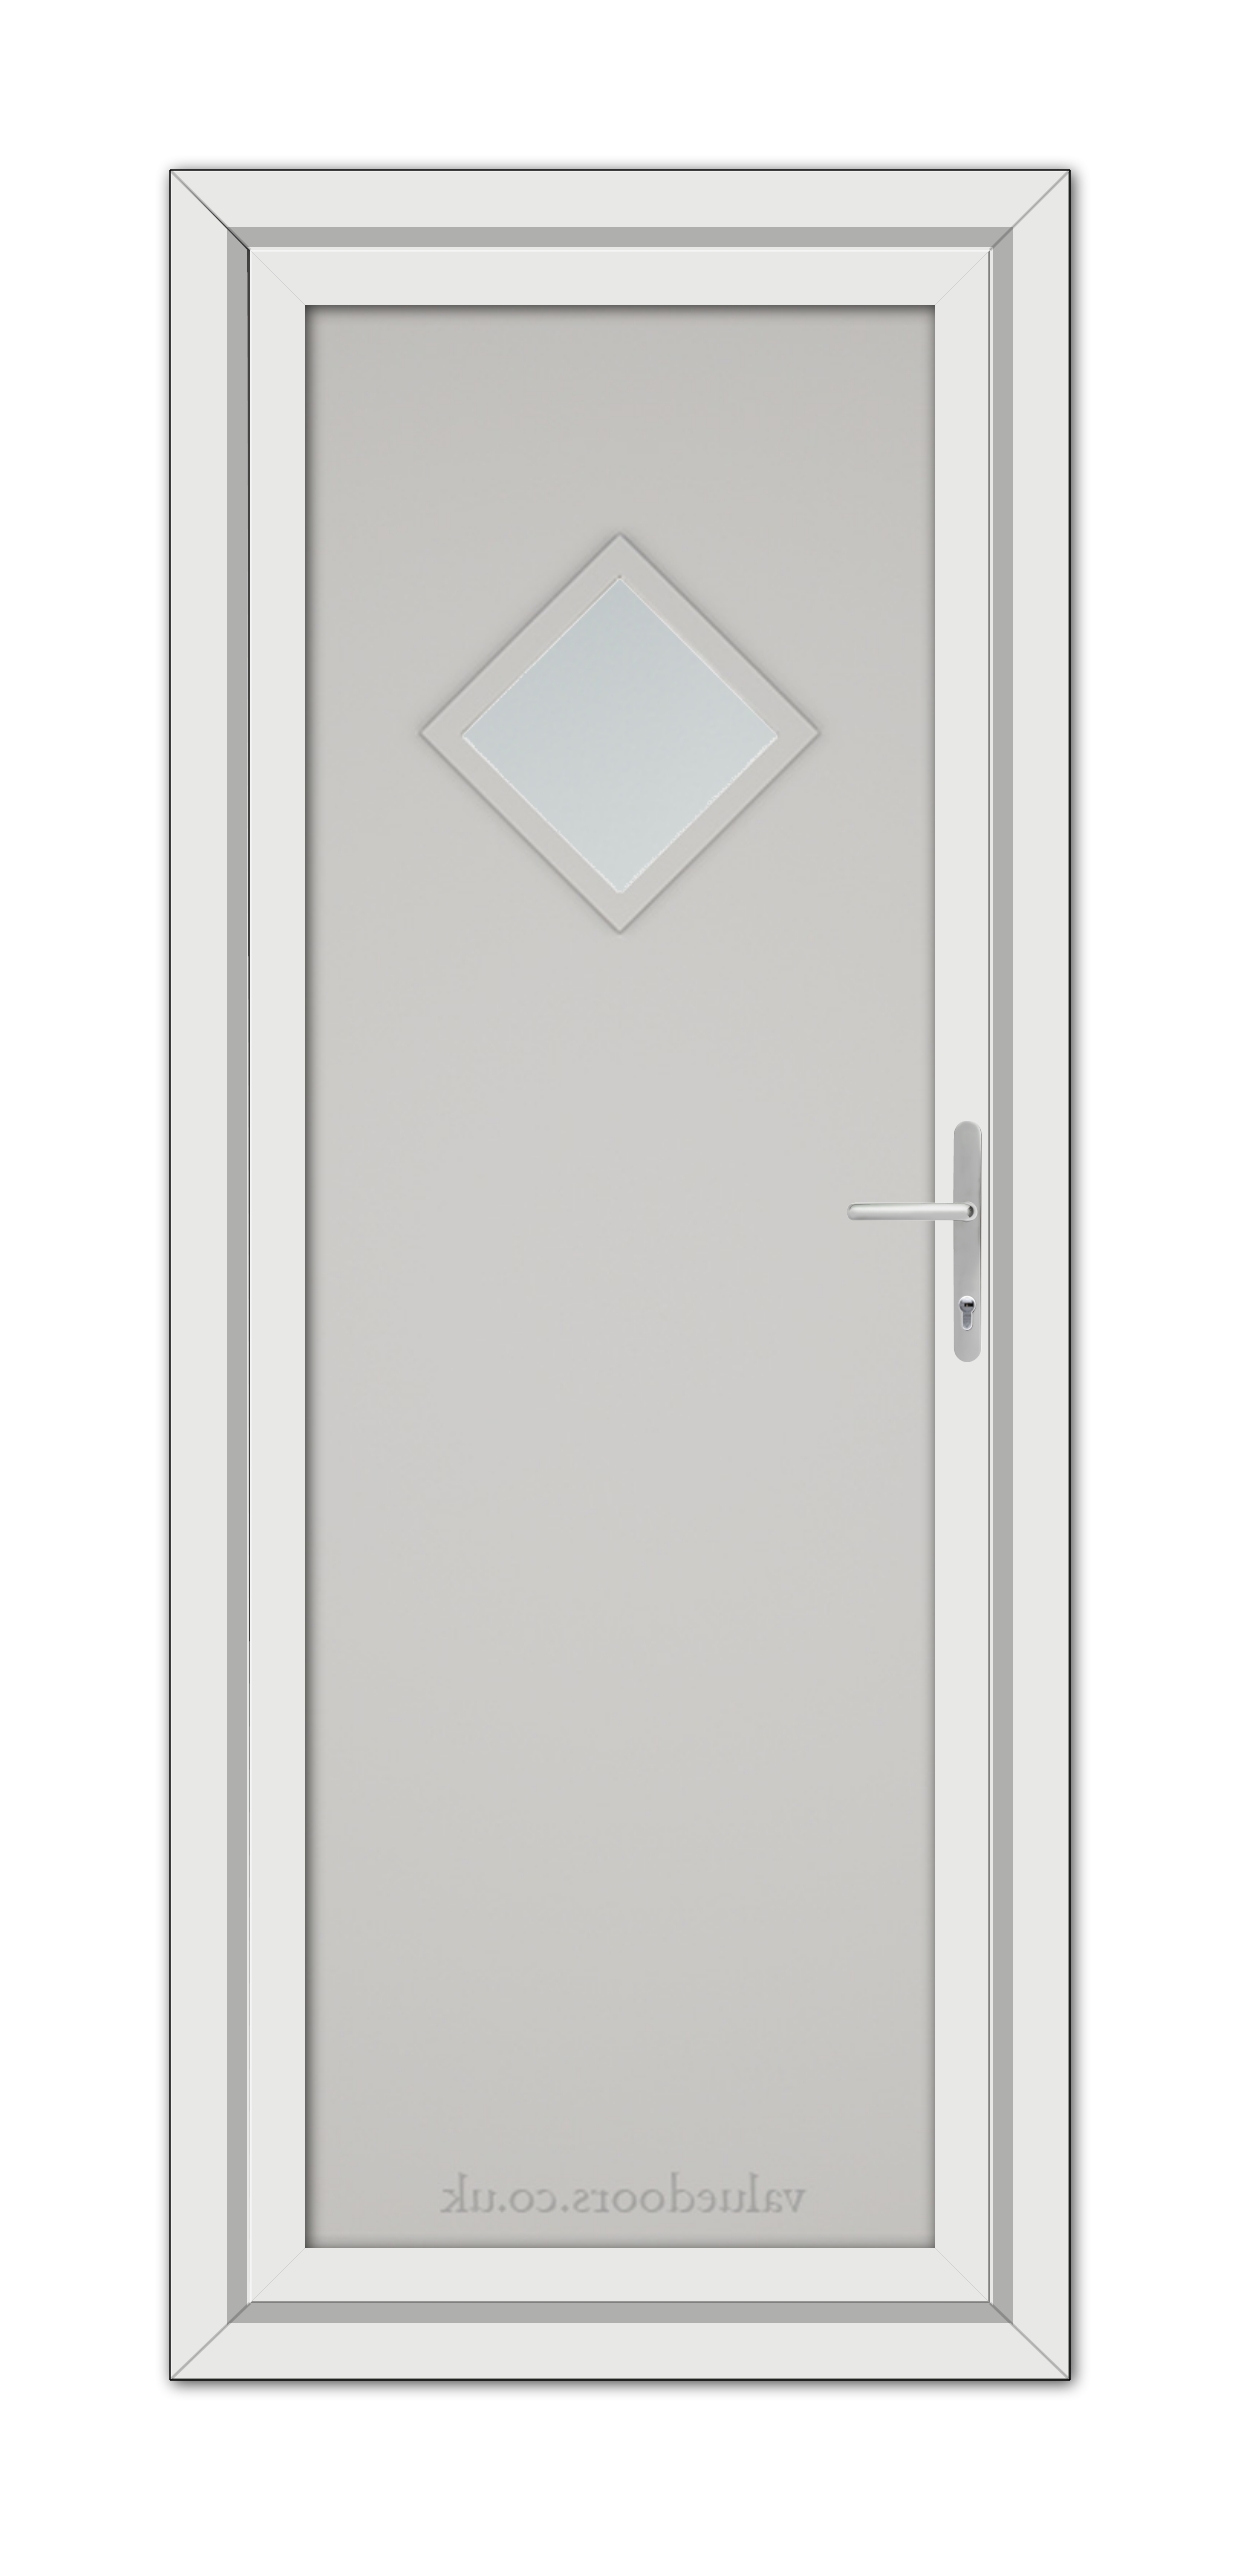 A Silver Grey Modern 5131 uPVC door featuring a diamond-shaped window at the top and a metallic handle on the right side.